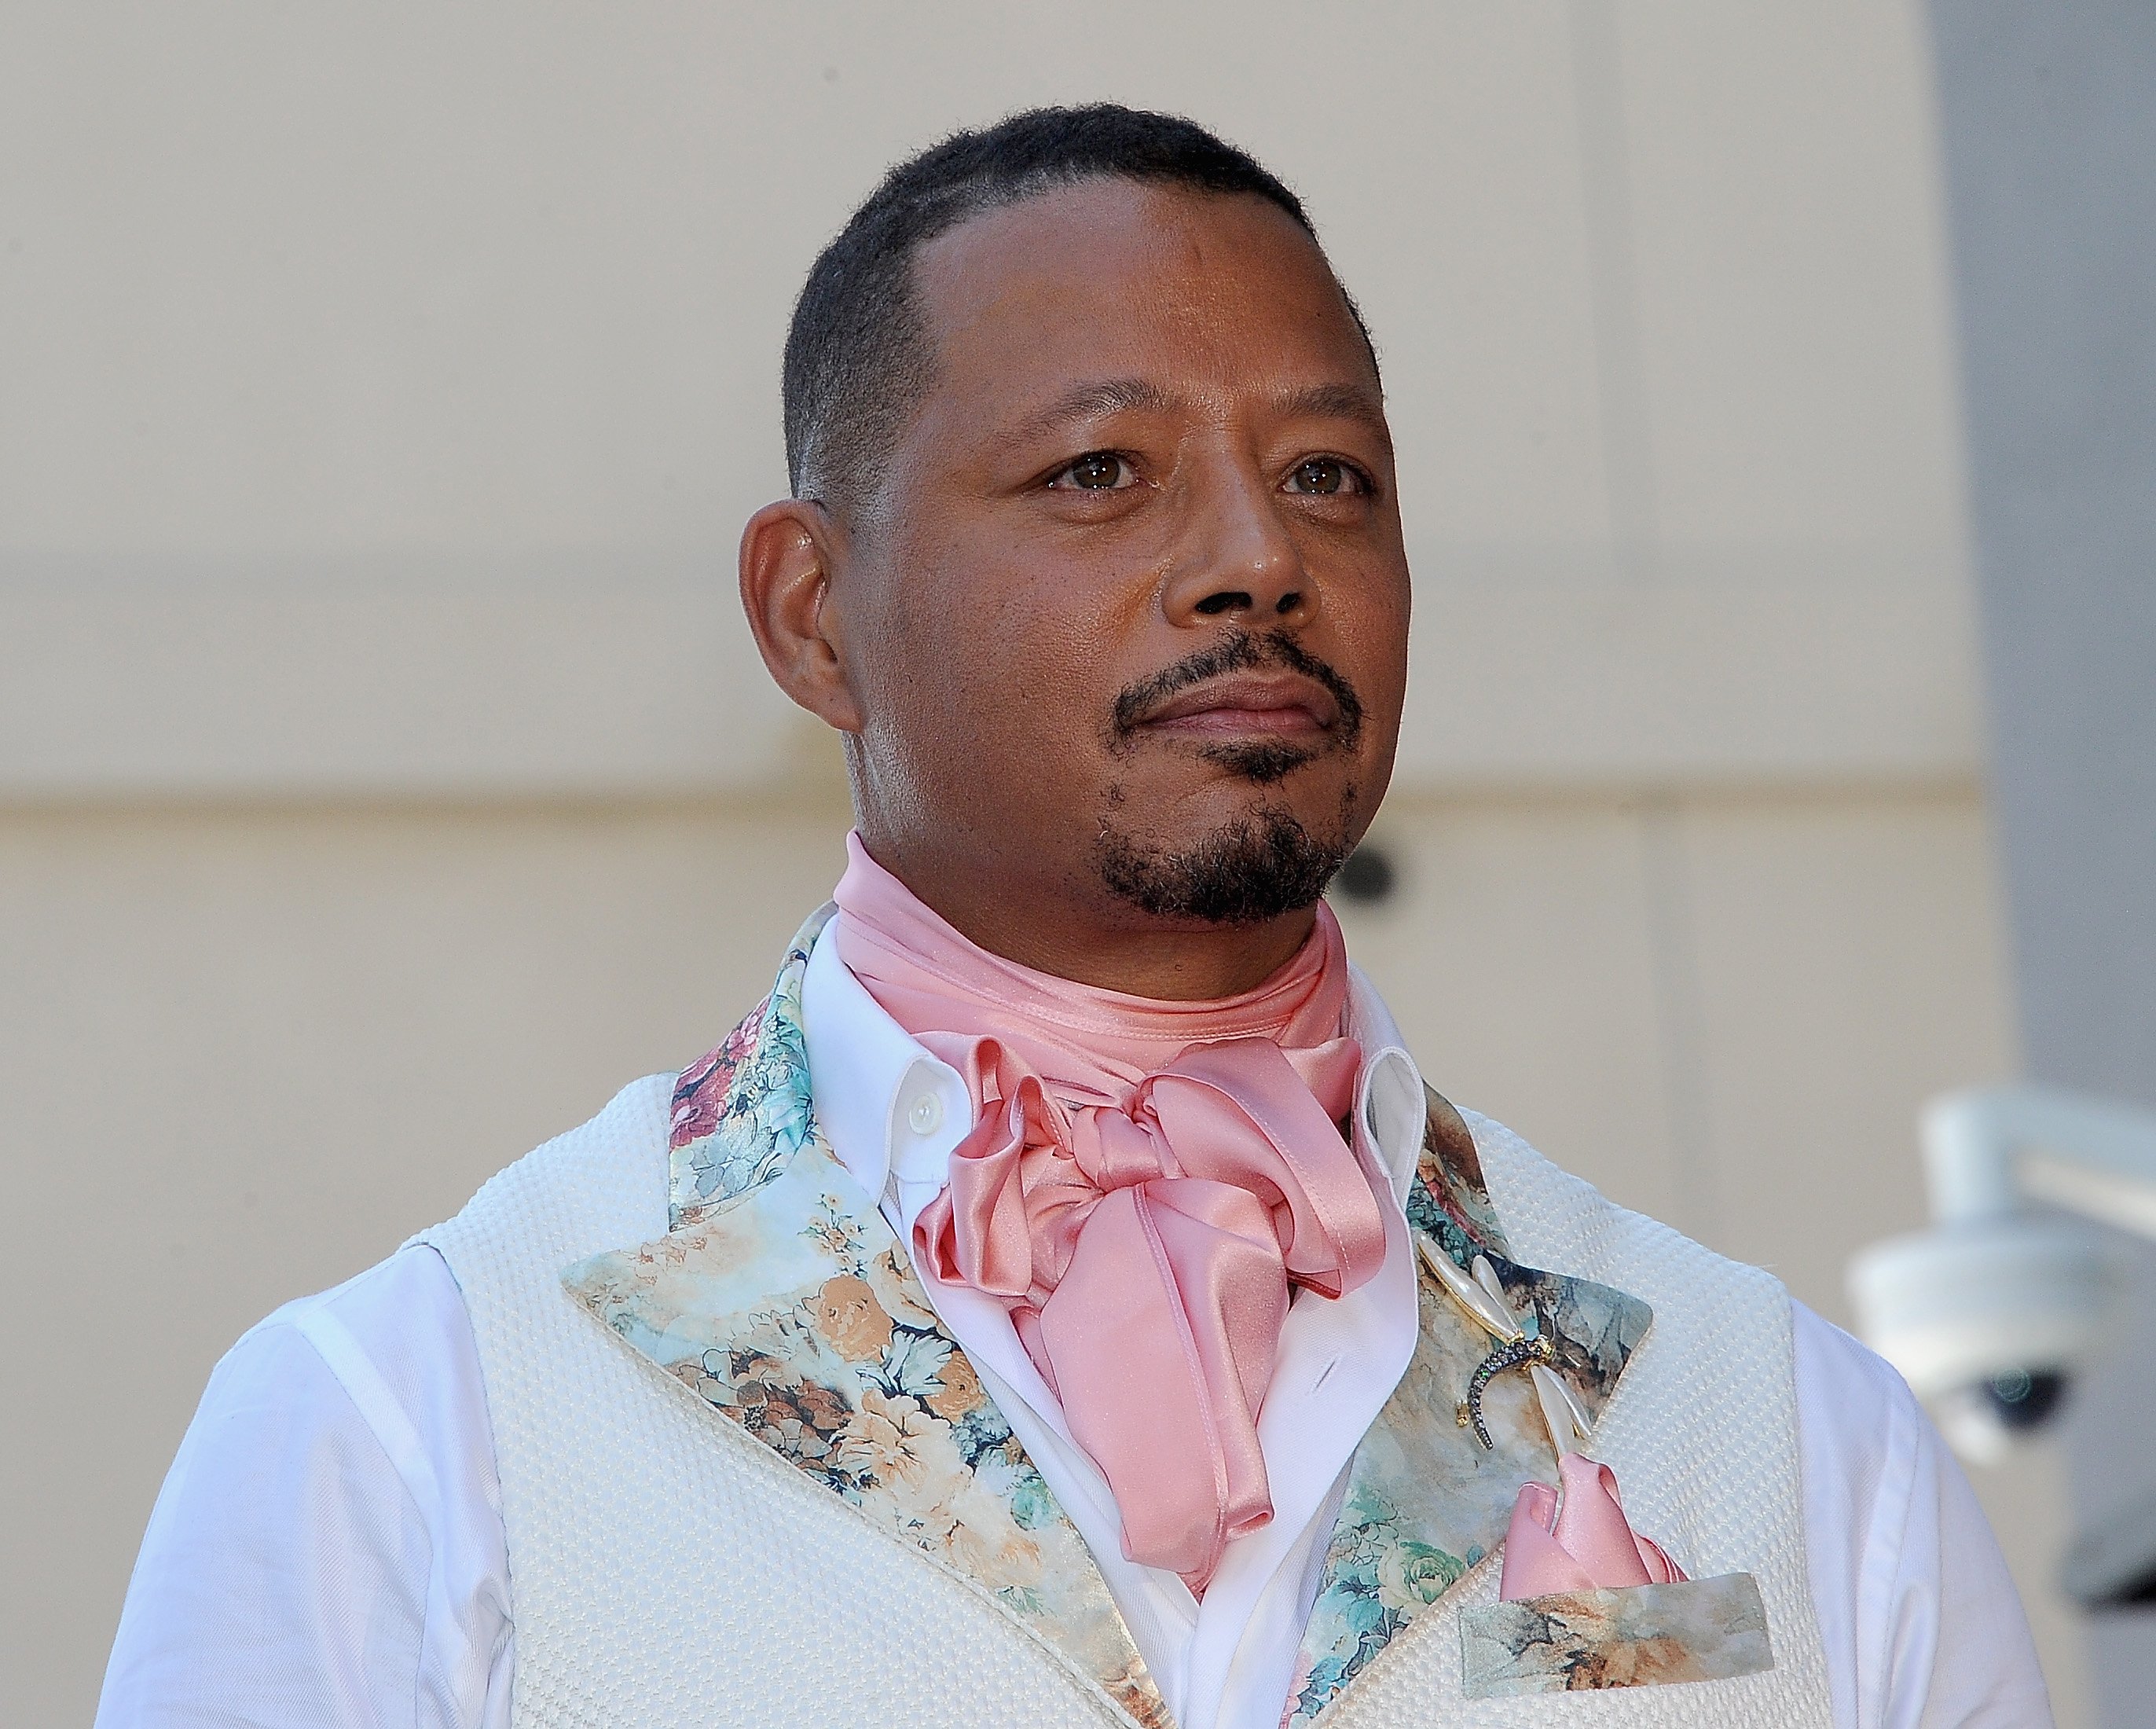 https://www.cheatsheet.com/wp-content/uploads/2021/08/Terrence-Howard-crying.jpg?w=1024&h=821&strip=all&quality=89